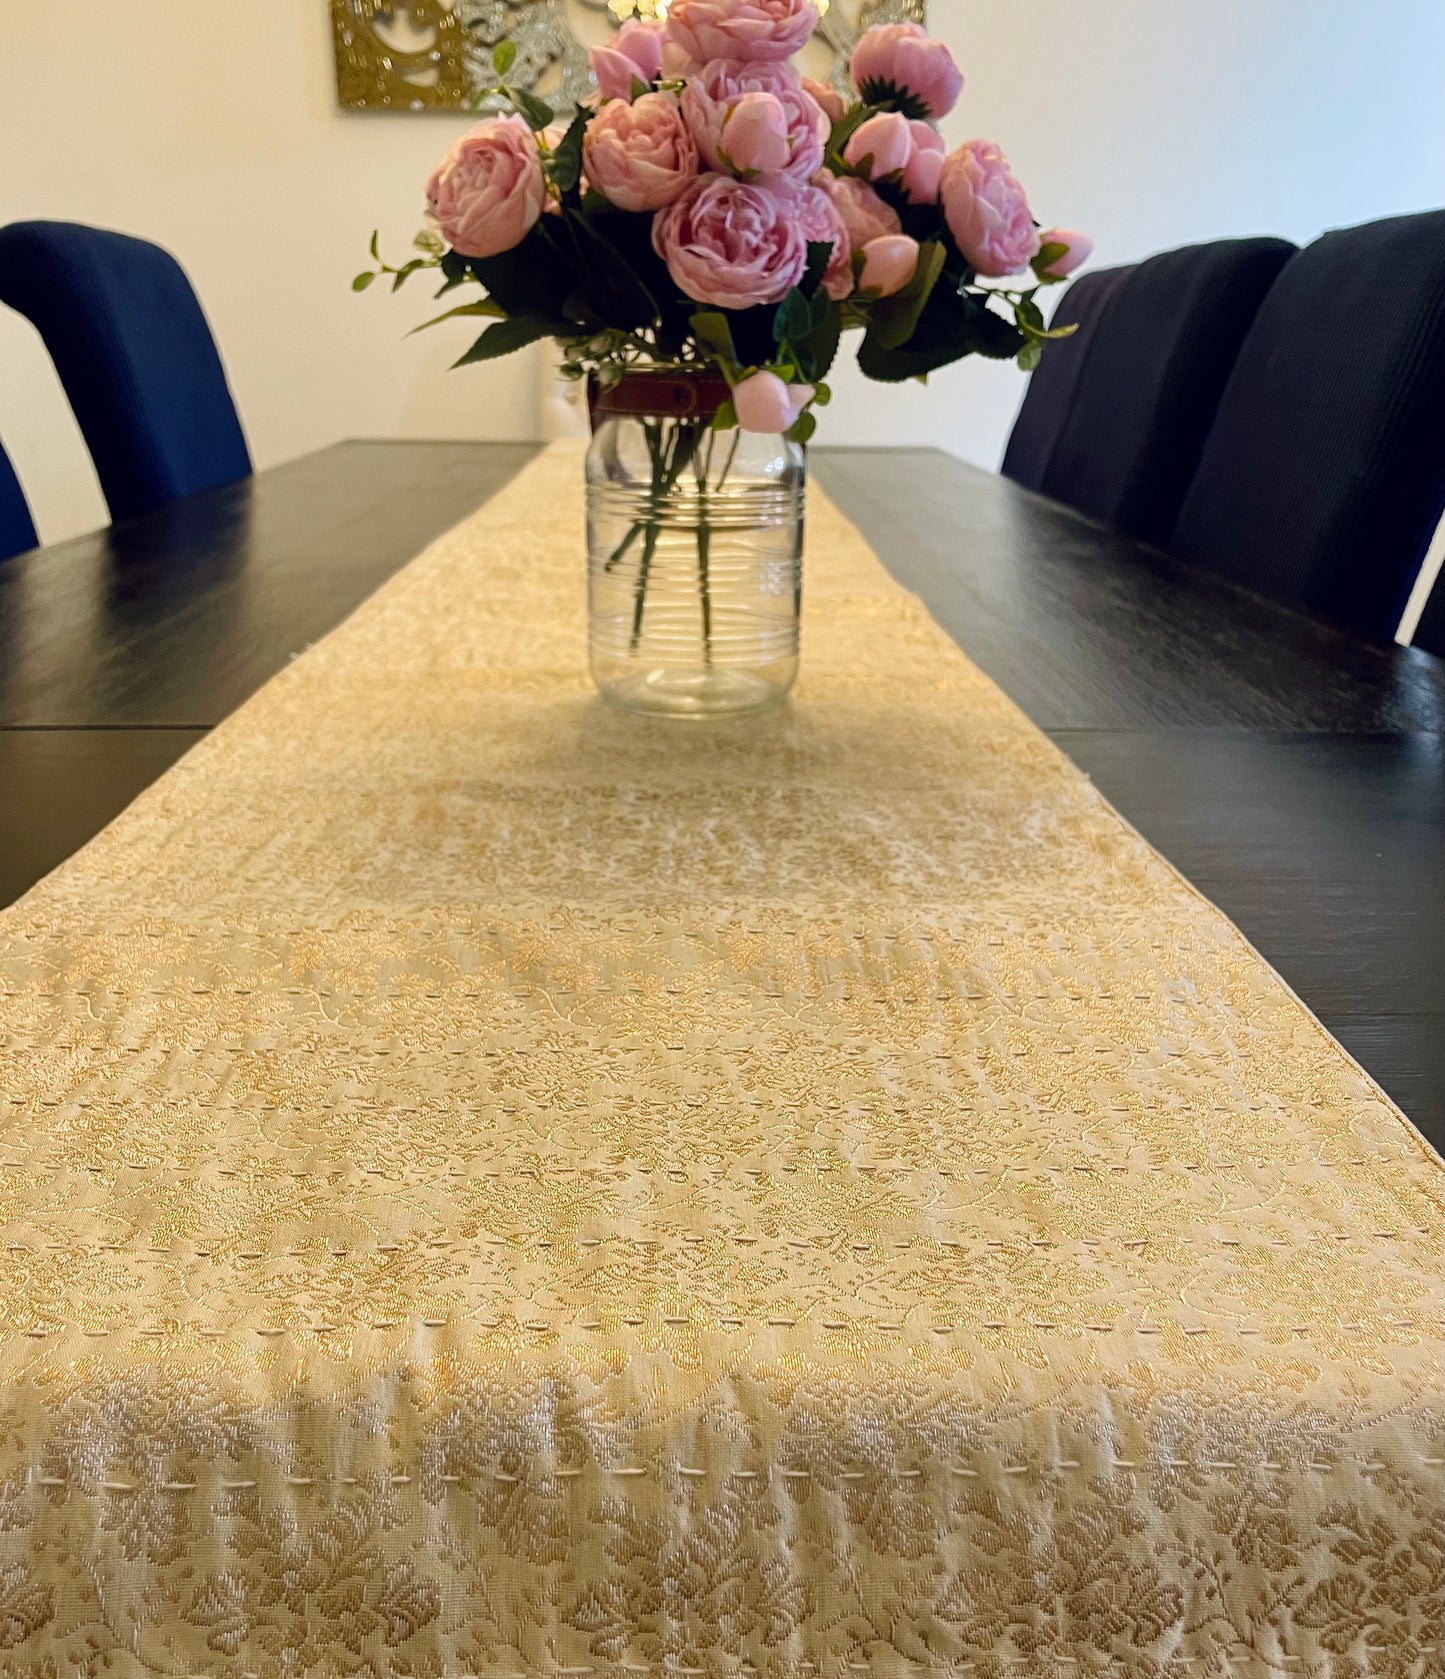 Winter Blooms Kantha Hand-Stitched Table Runners